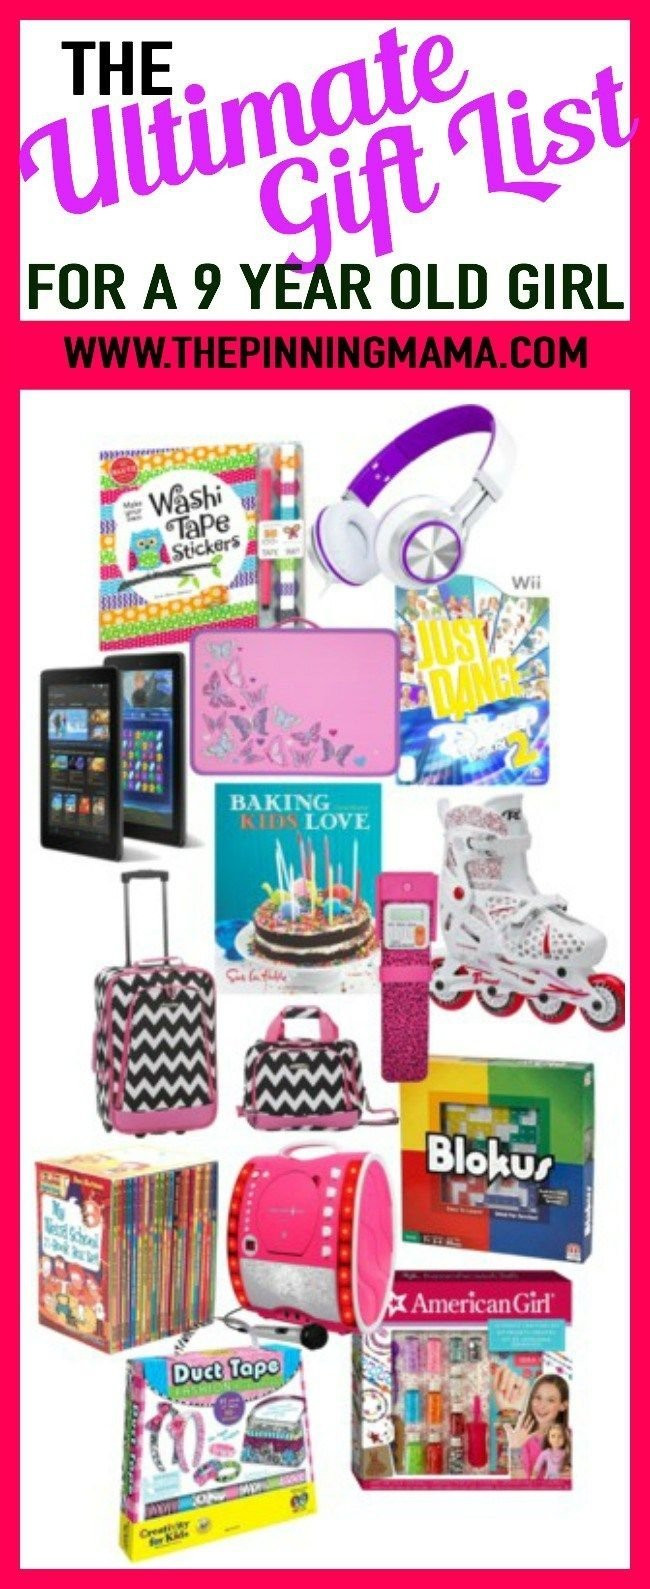 Girls Gift Ideas Age 9
 10 Lovable Gift Ideas For Girls Age 9 2019